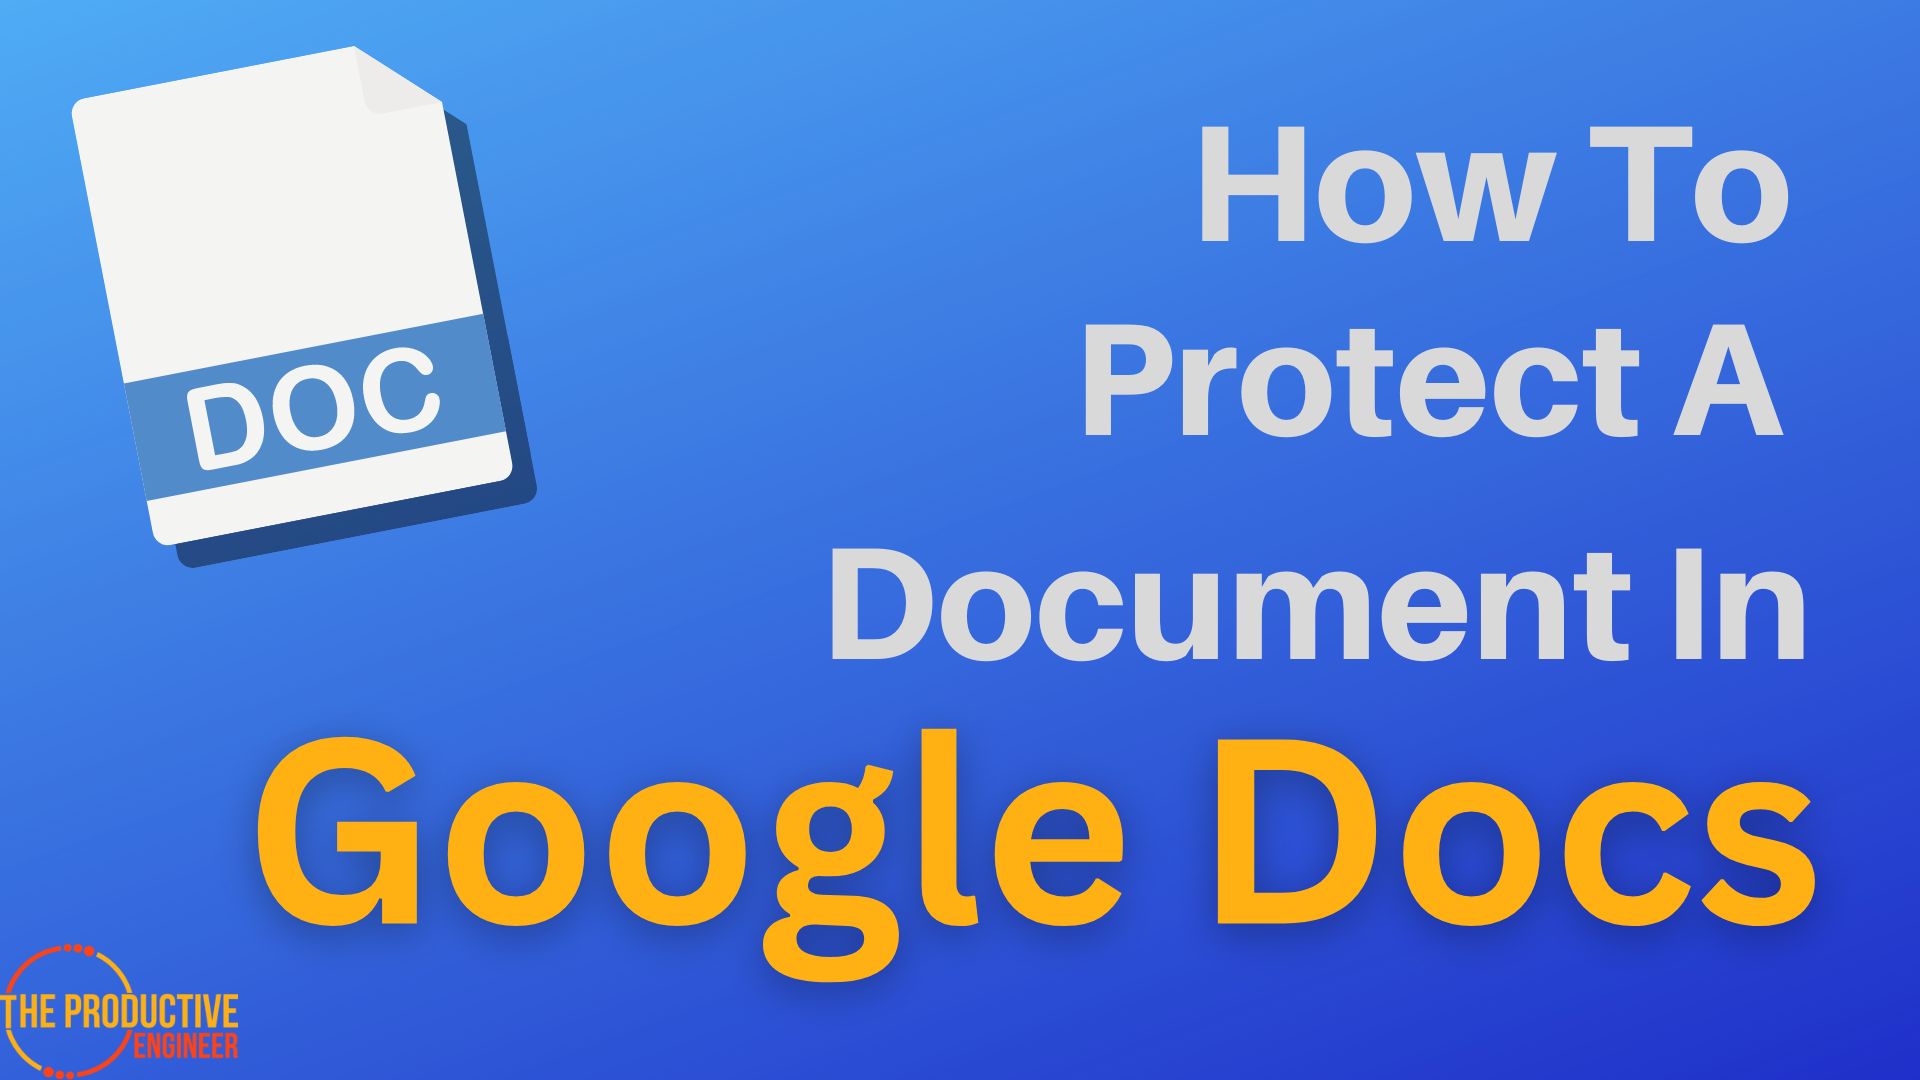 How To Protect A Document In Google Docs